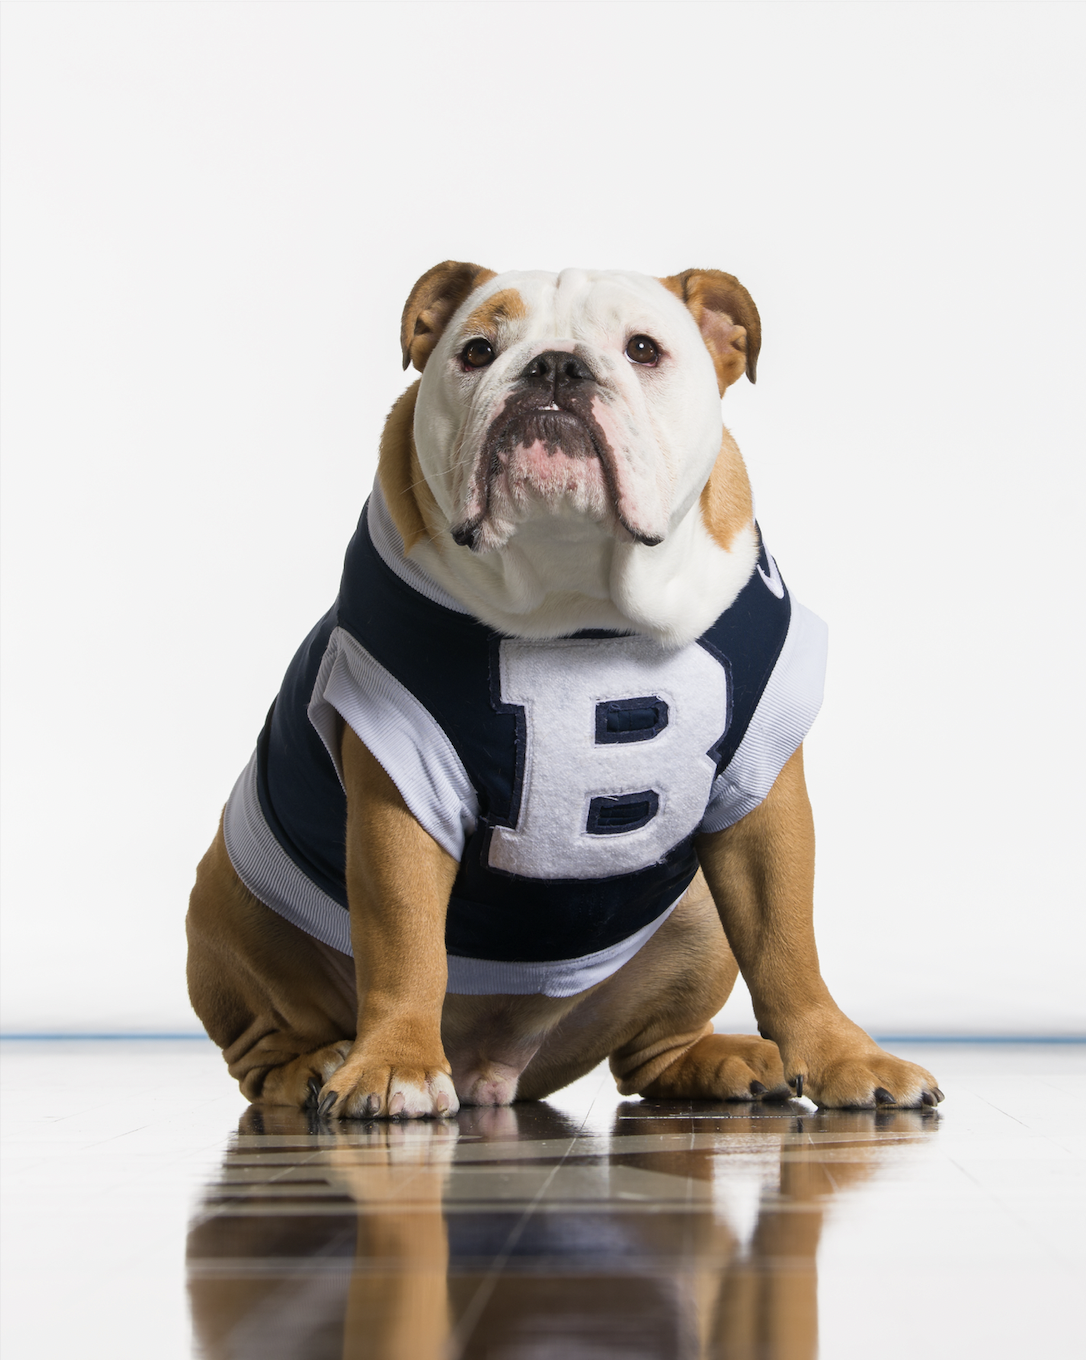 A brown and white English bulldog clad in a blue and white jersey emblazoned with a large white "B" sits patiently for his photo.